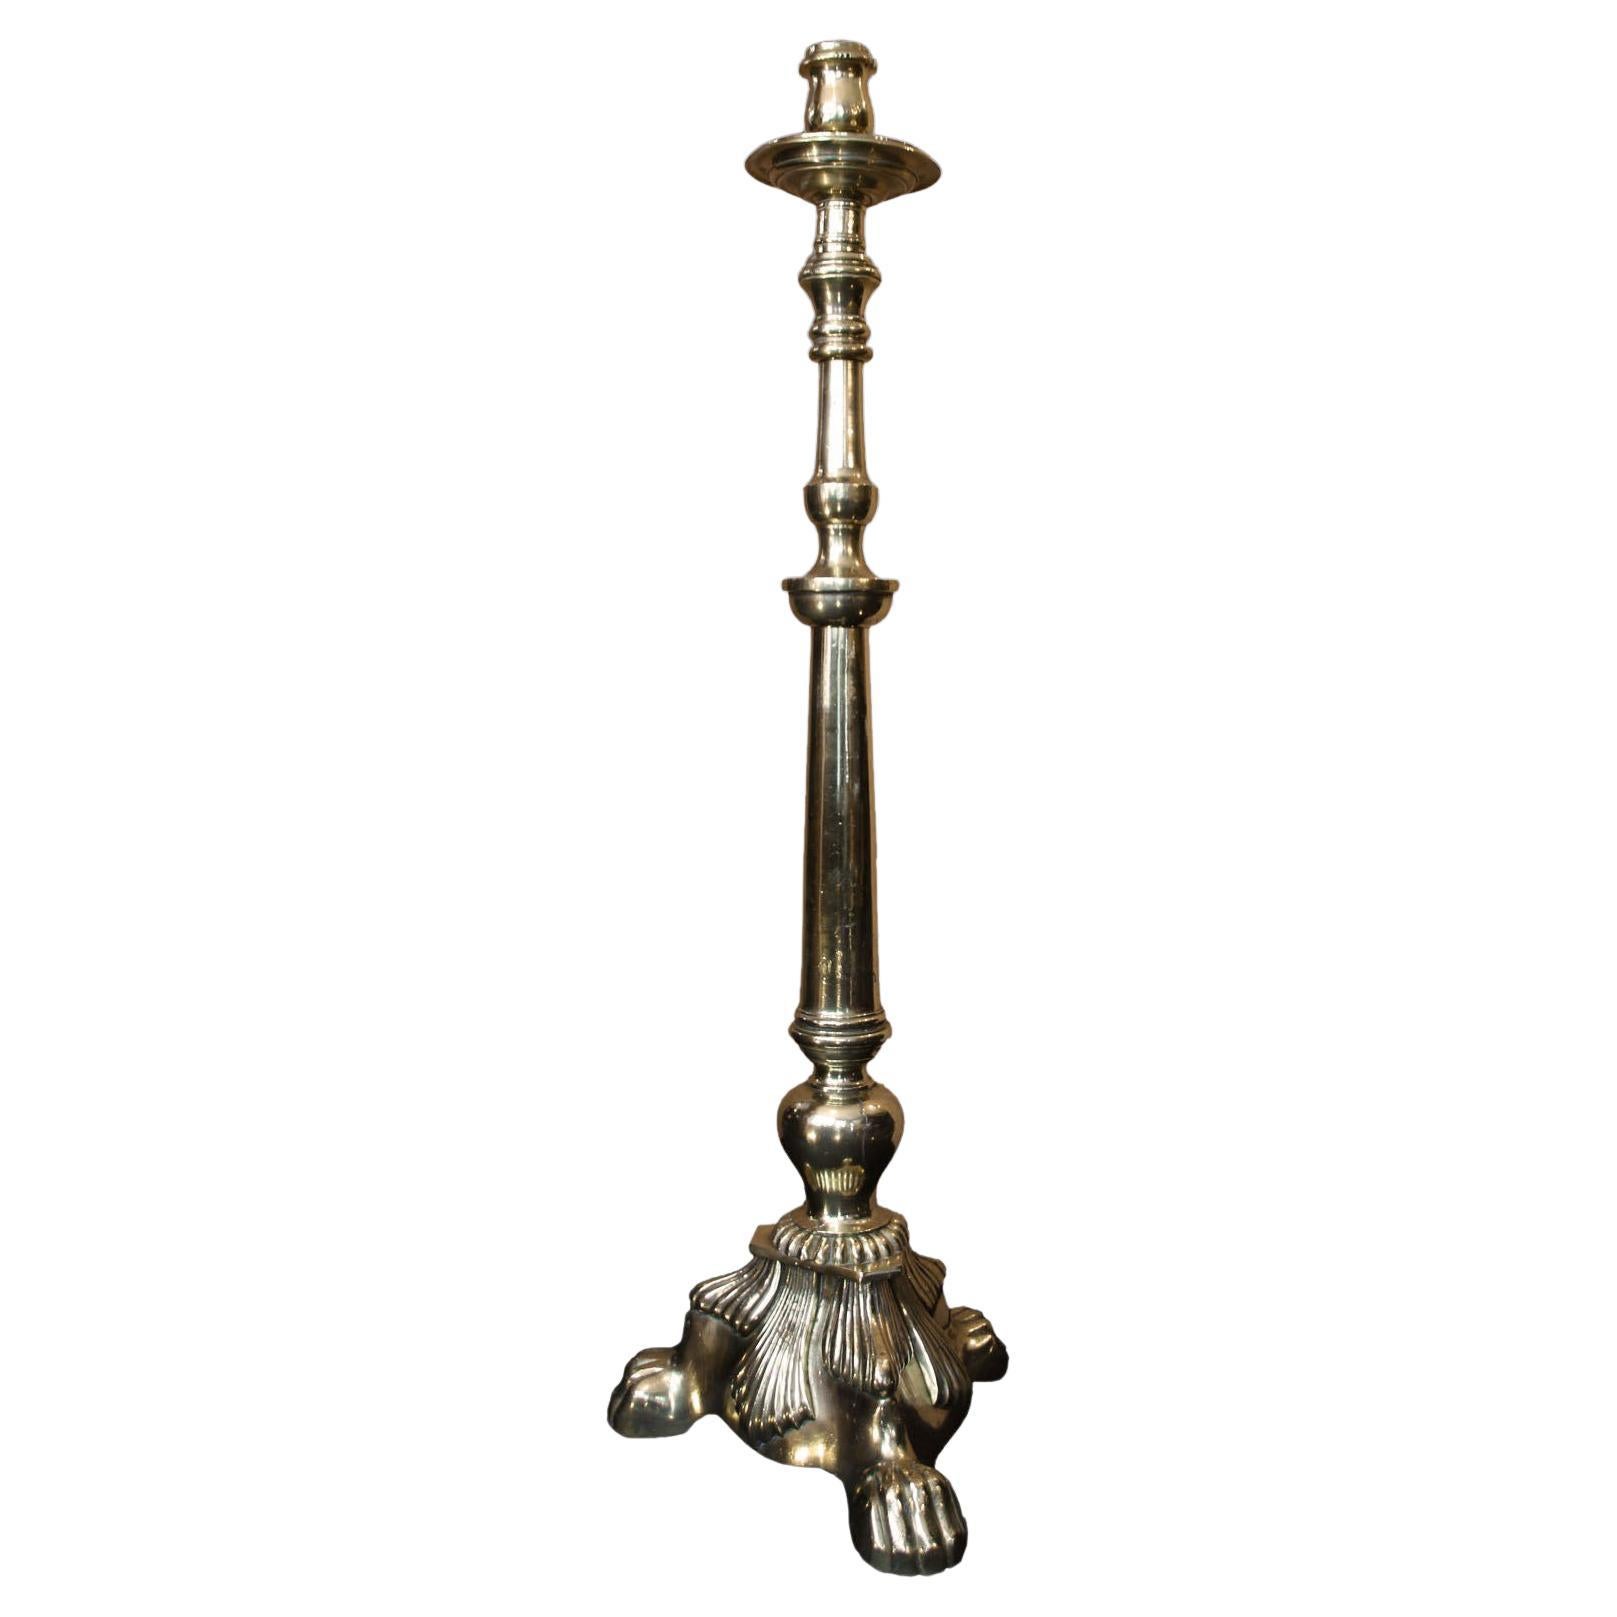 Late 18th Century Orthodox Branch-Candlestick